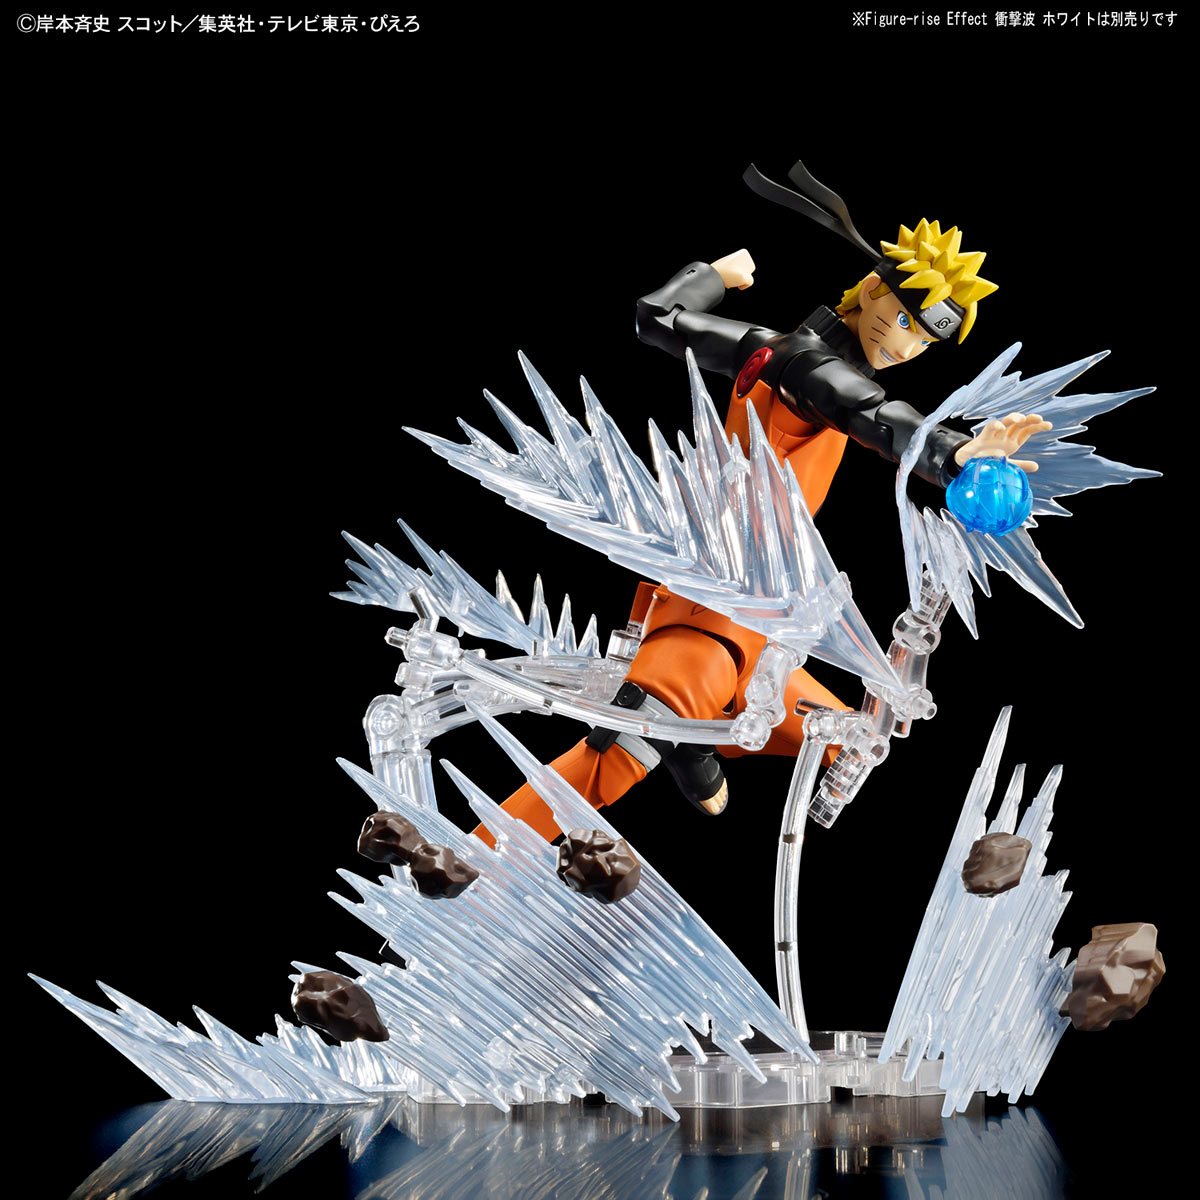 Naruto designed with CHEAP Materials! - #cheap #designed